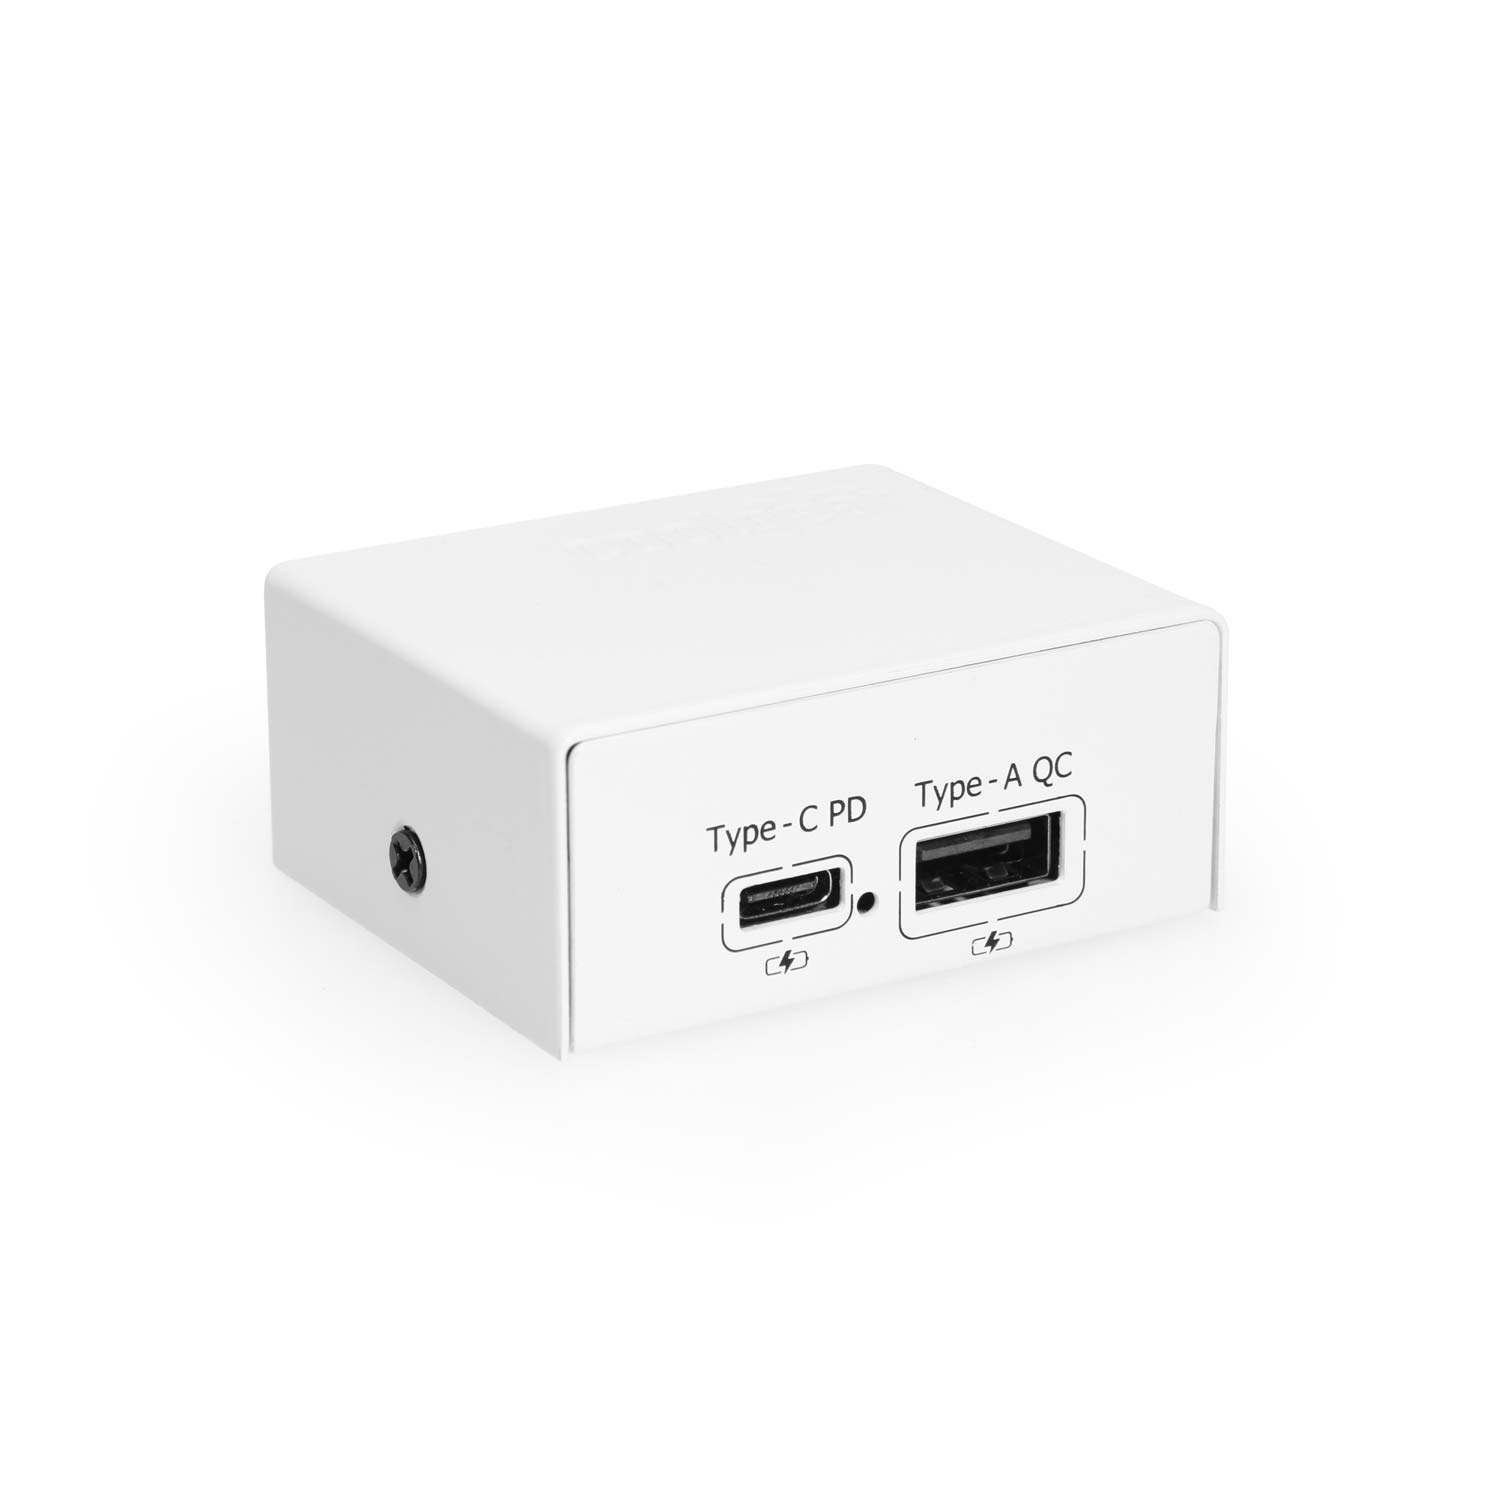 Coolgear Inc CG-CMD60W ChargeIt! Mini Desktop 75W Dual Port USB-A & USB-C PD Charger w/ PPS & Qc4.0 Support